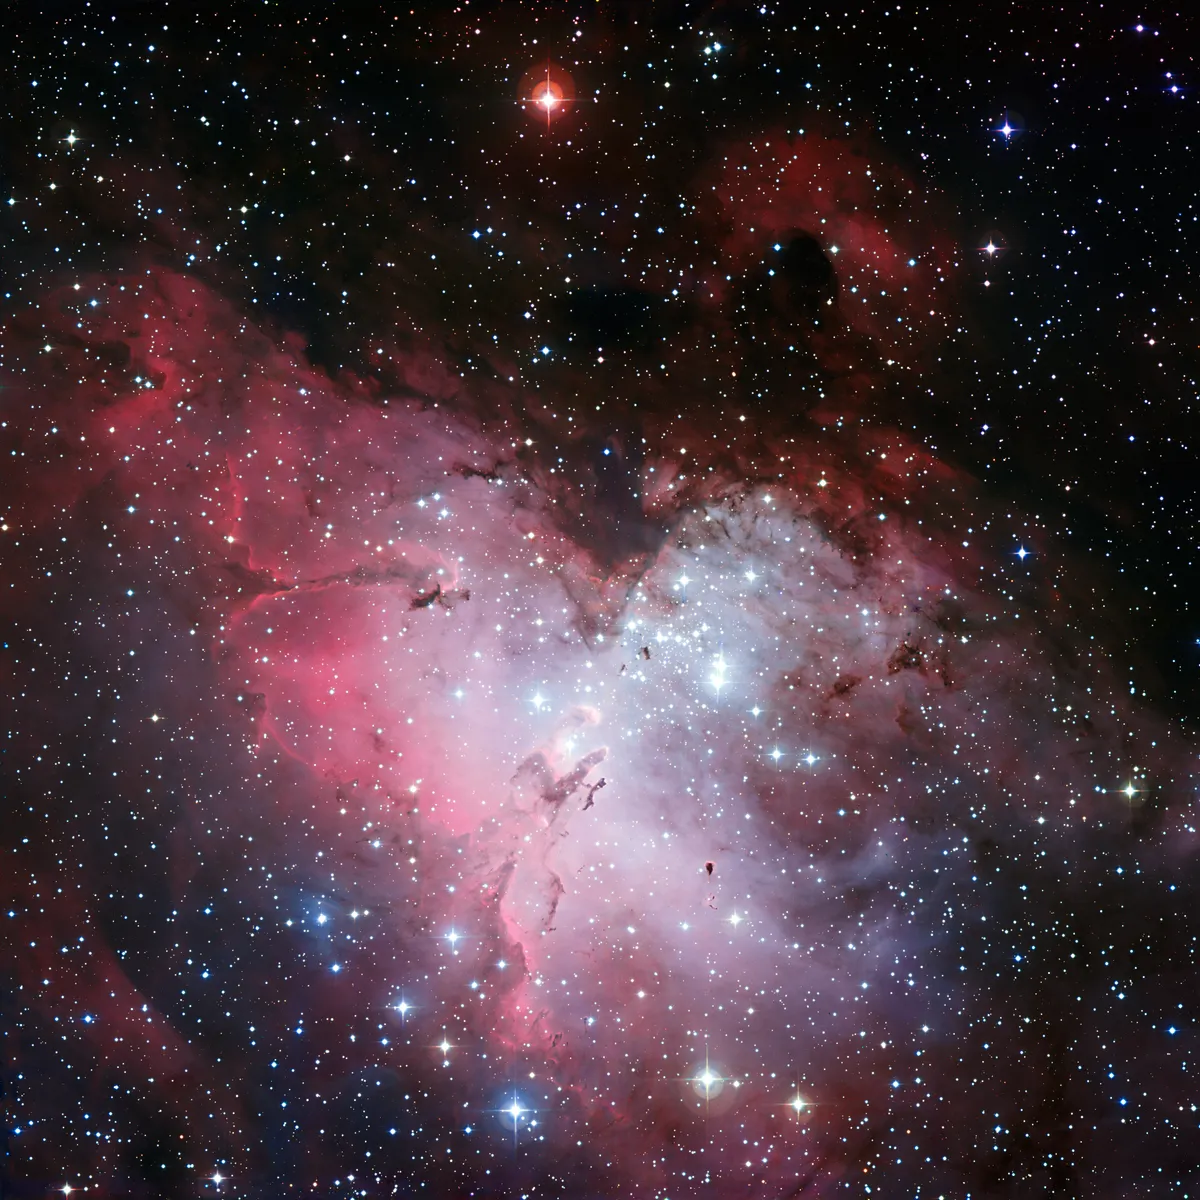 The Eagle Nebula, based on images obtained with the Wide-Field Imager camera on the MPG/ESO 2.2-metre telescope at the La Silla Observatory. This is a star-forming region, so-called because it contains all the cosmic dust and gas necessary for new stars to be born.